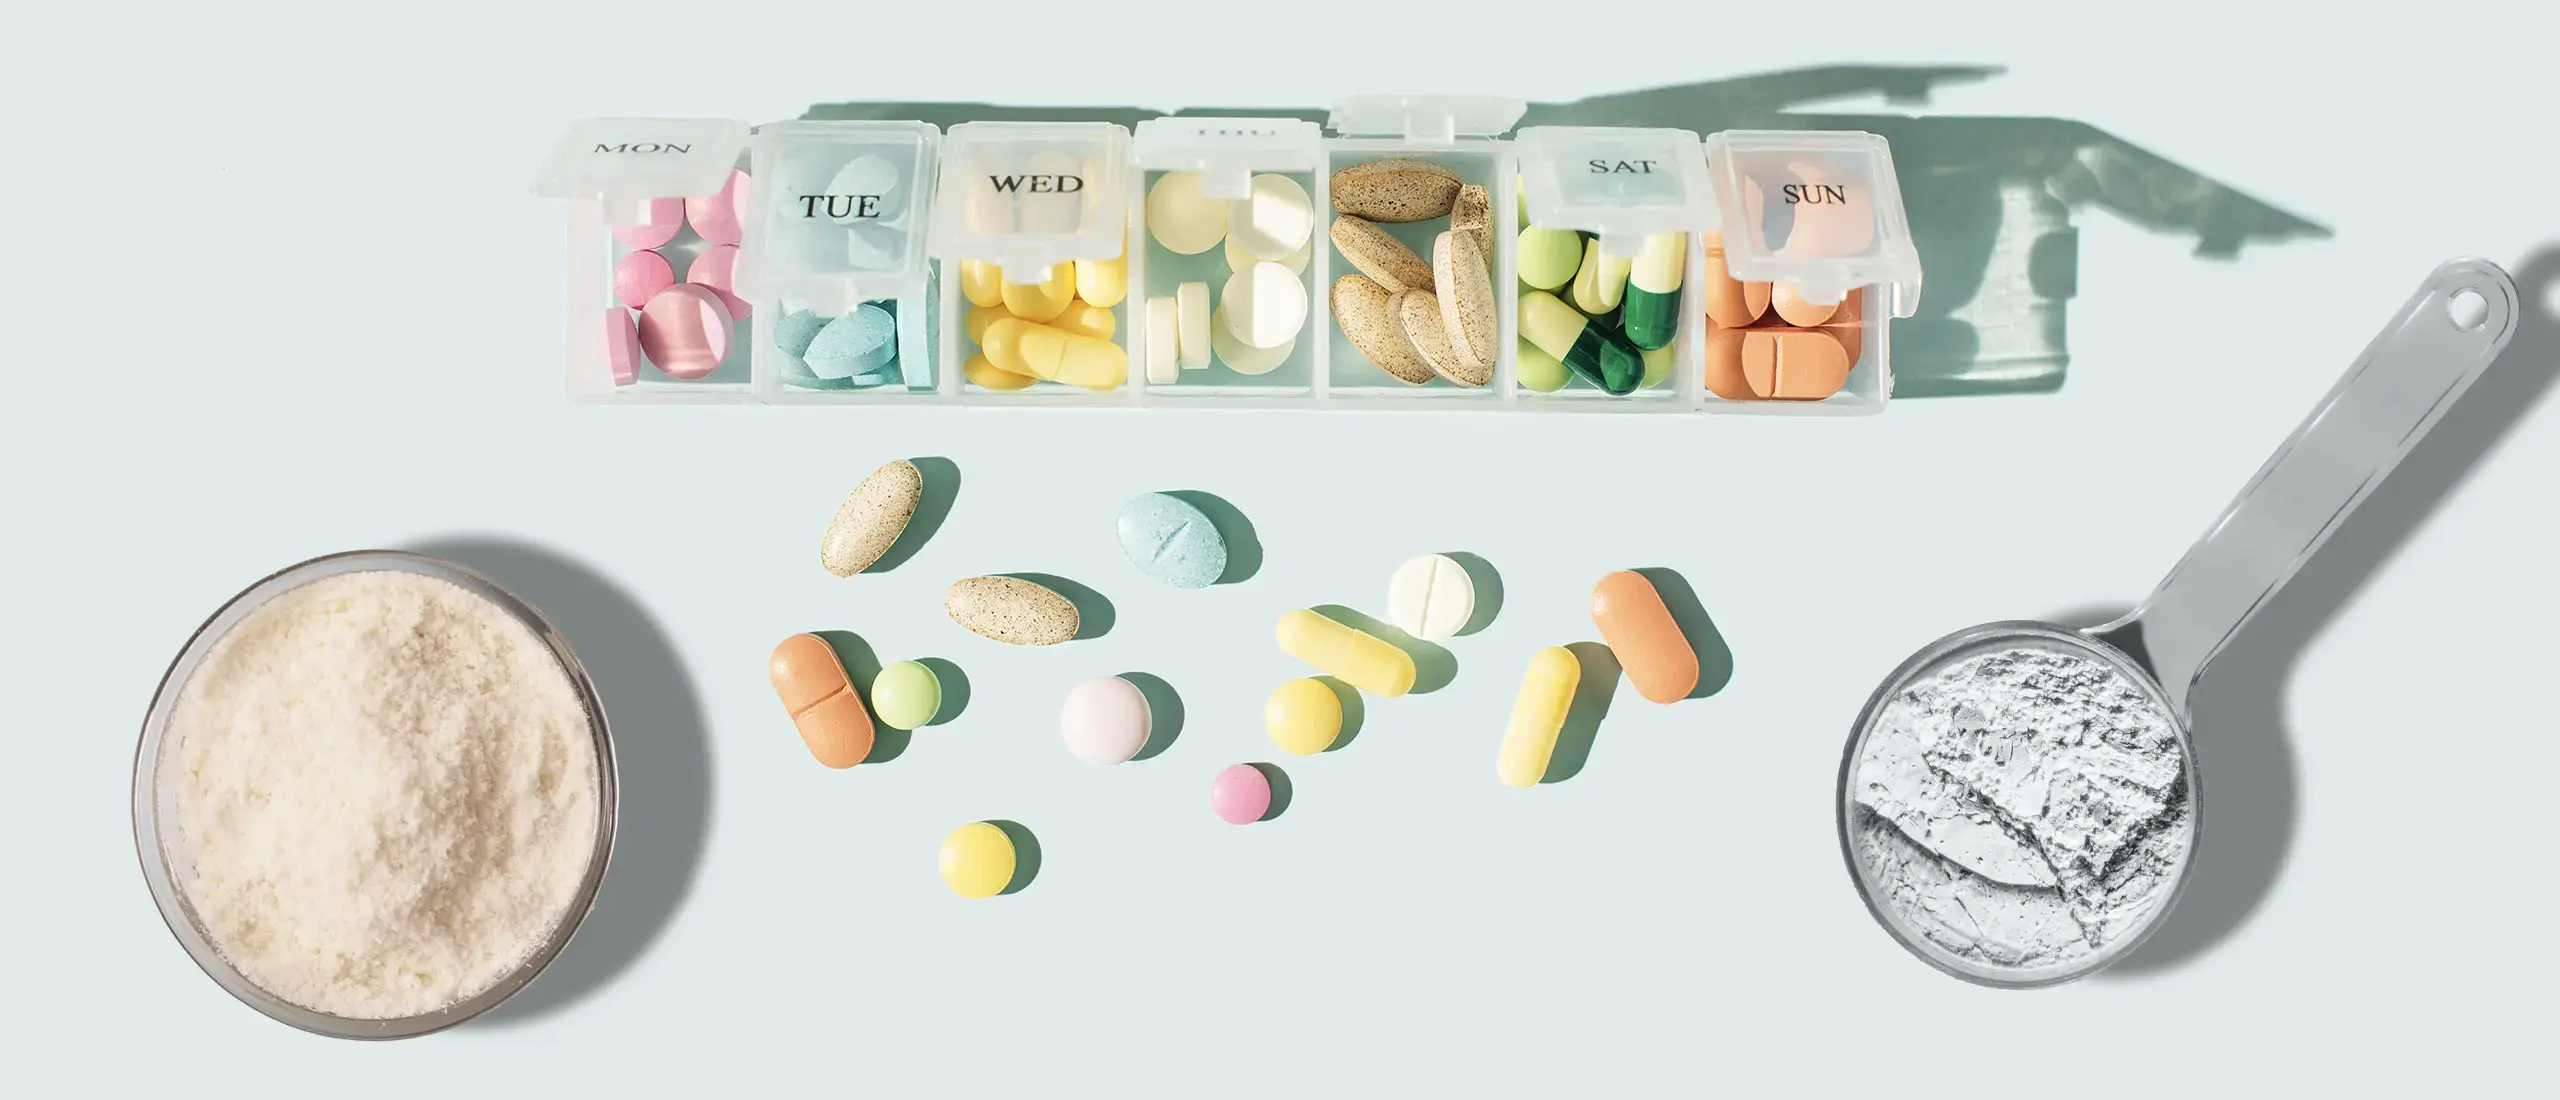 A pill box with colorful pills, a powdered drink, and a scoop of powder.